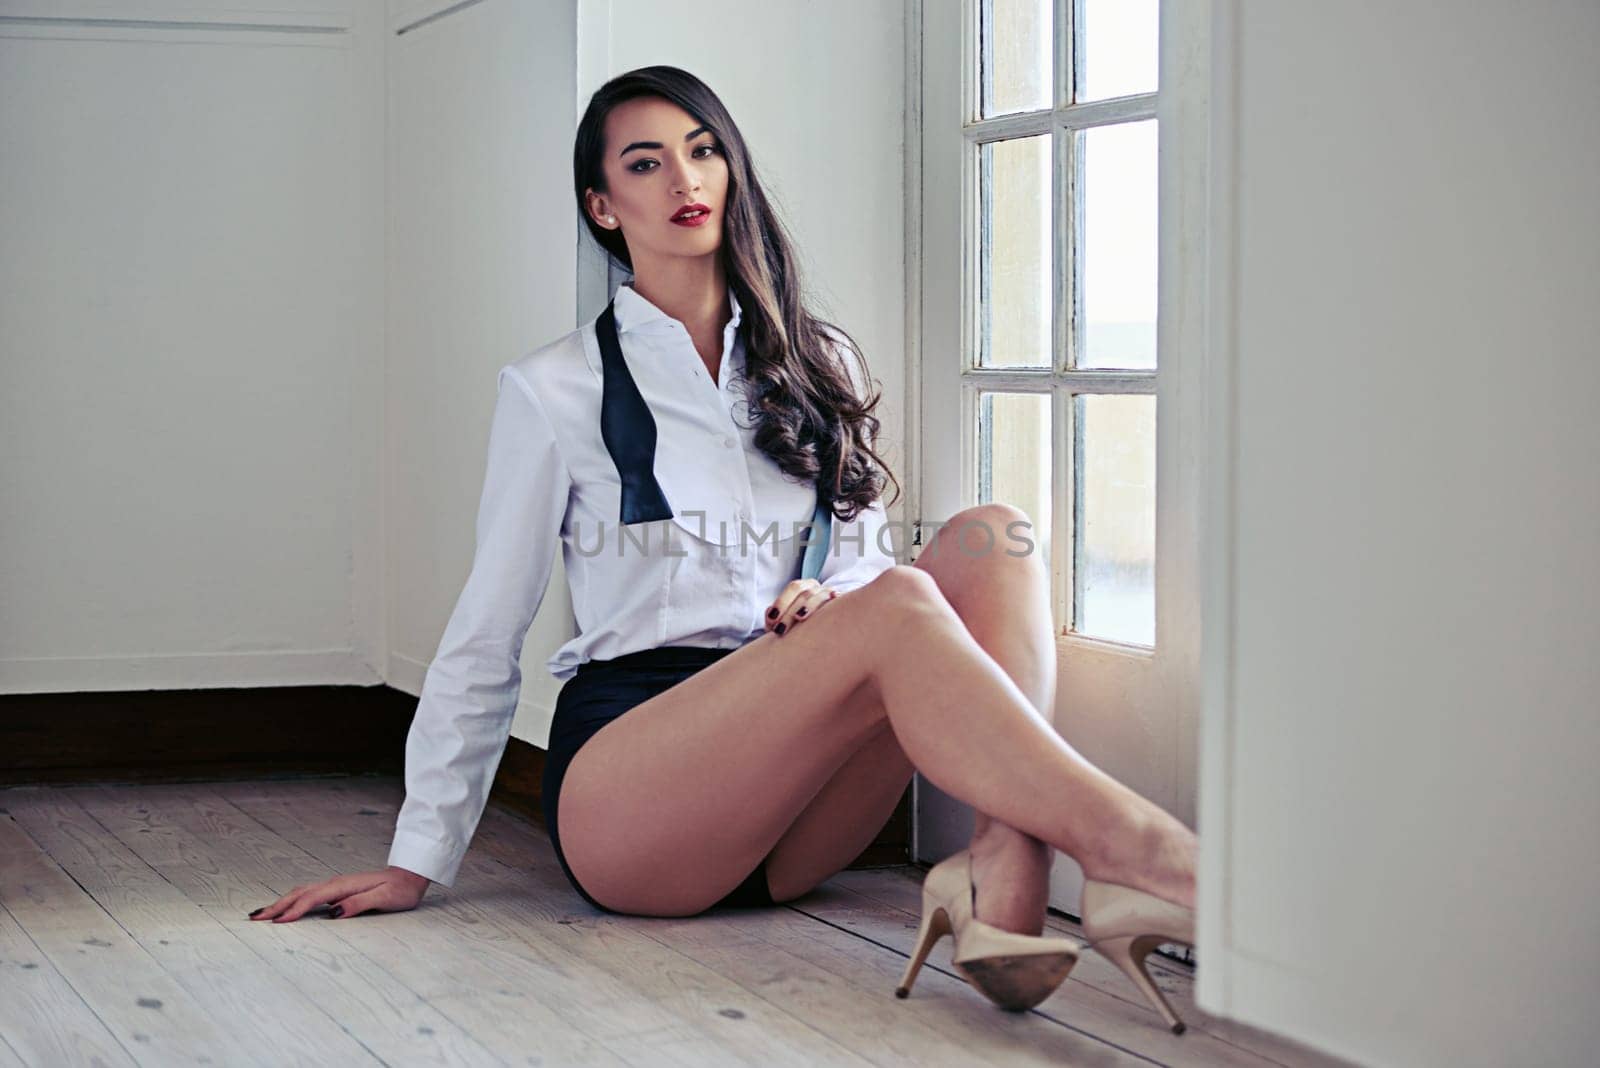 Asian woman, portrait and edgy fashion with confidence at window on floor with suit bowtie, high heels or underwear. Female person, face and stylish modeling with attitude or shirt, cool or sitting.